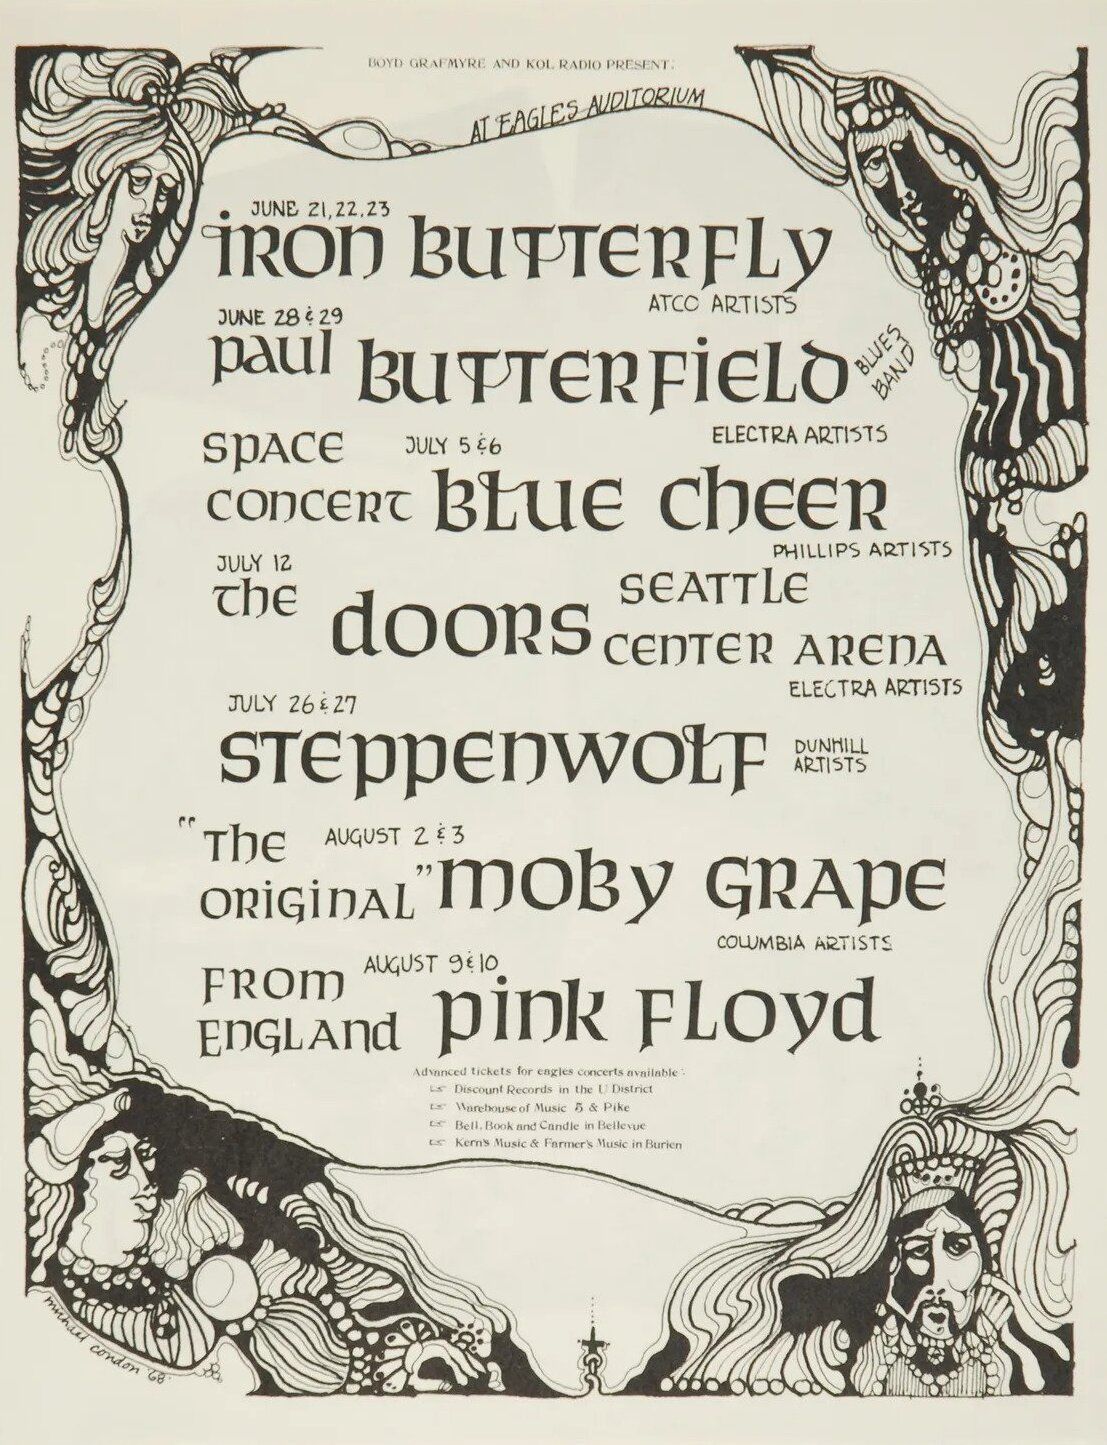 Iron Butterfly with The Doors & Pink Floyd Eagles Auditorium Handbill 1968 Concert Poster